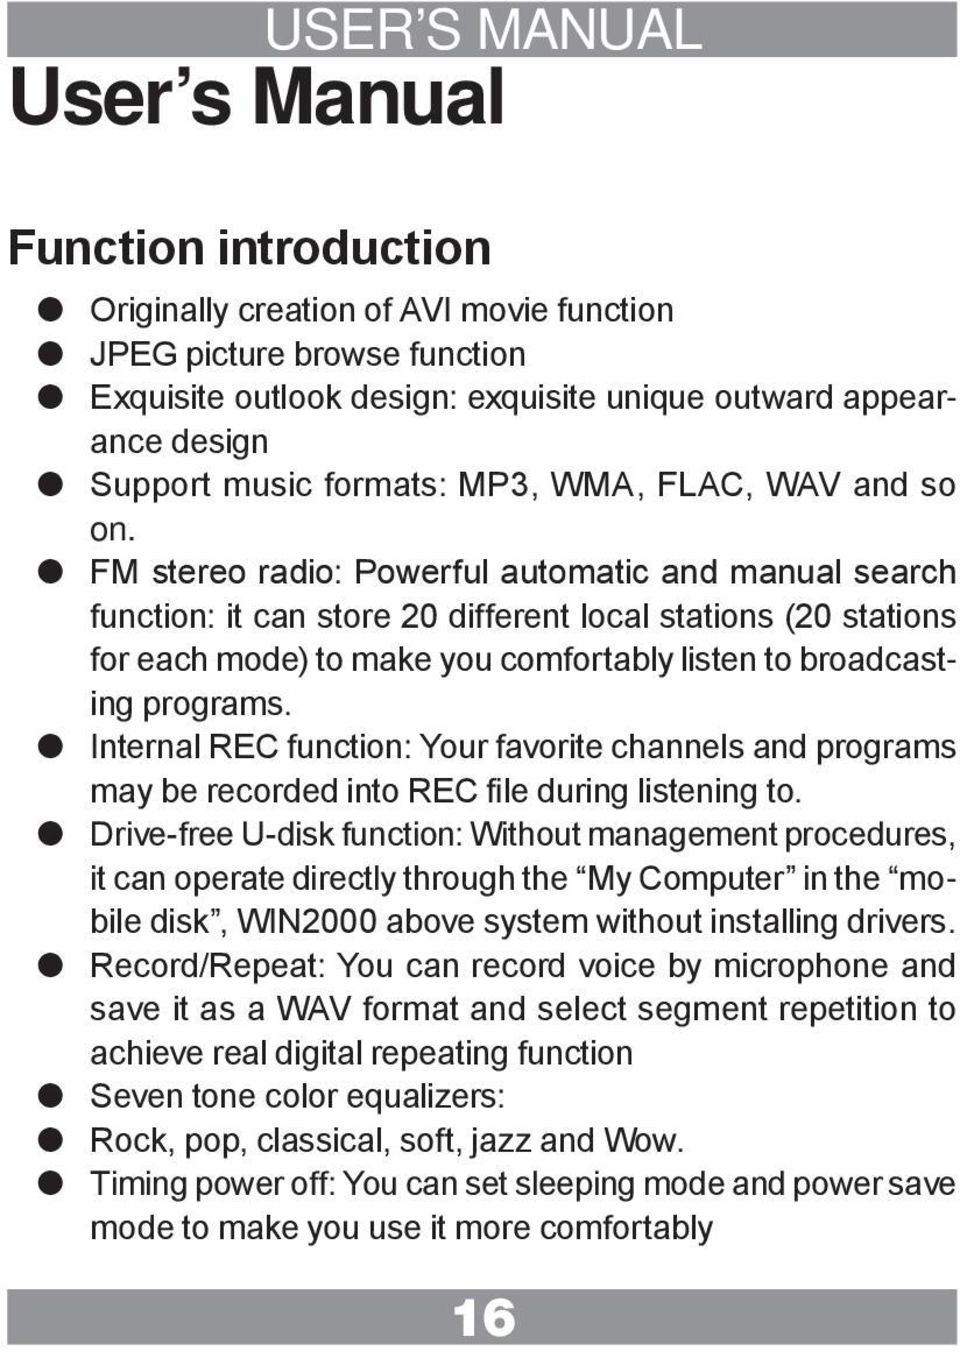 z FM stereo radio: Powerful automatic and manual search function: it can store 20 different local stations (20 stations for each mode) to make you comfortably listen to broadcasting programs.